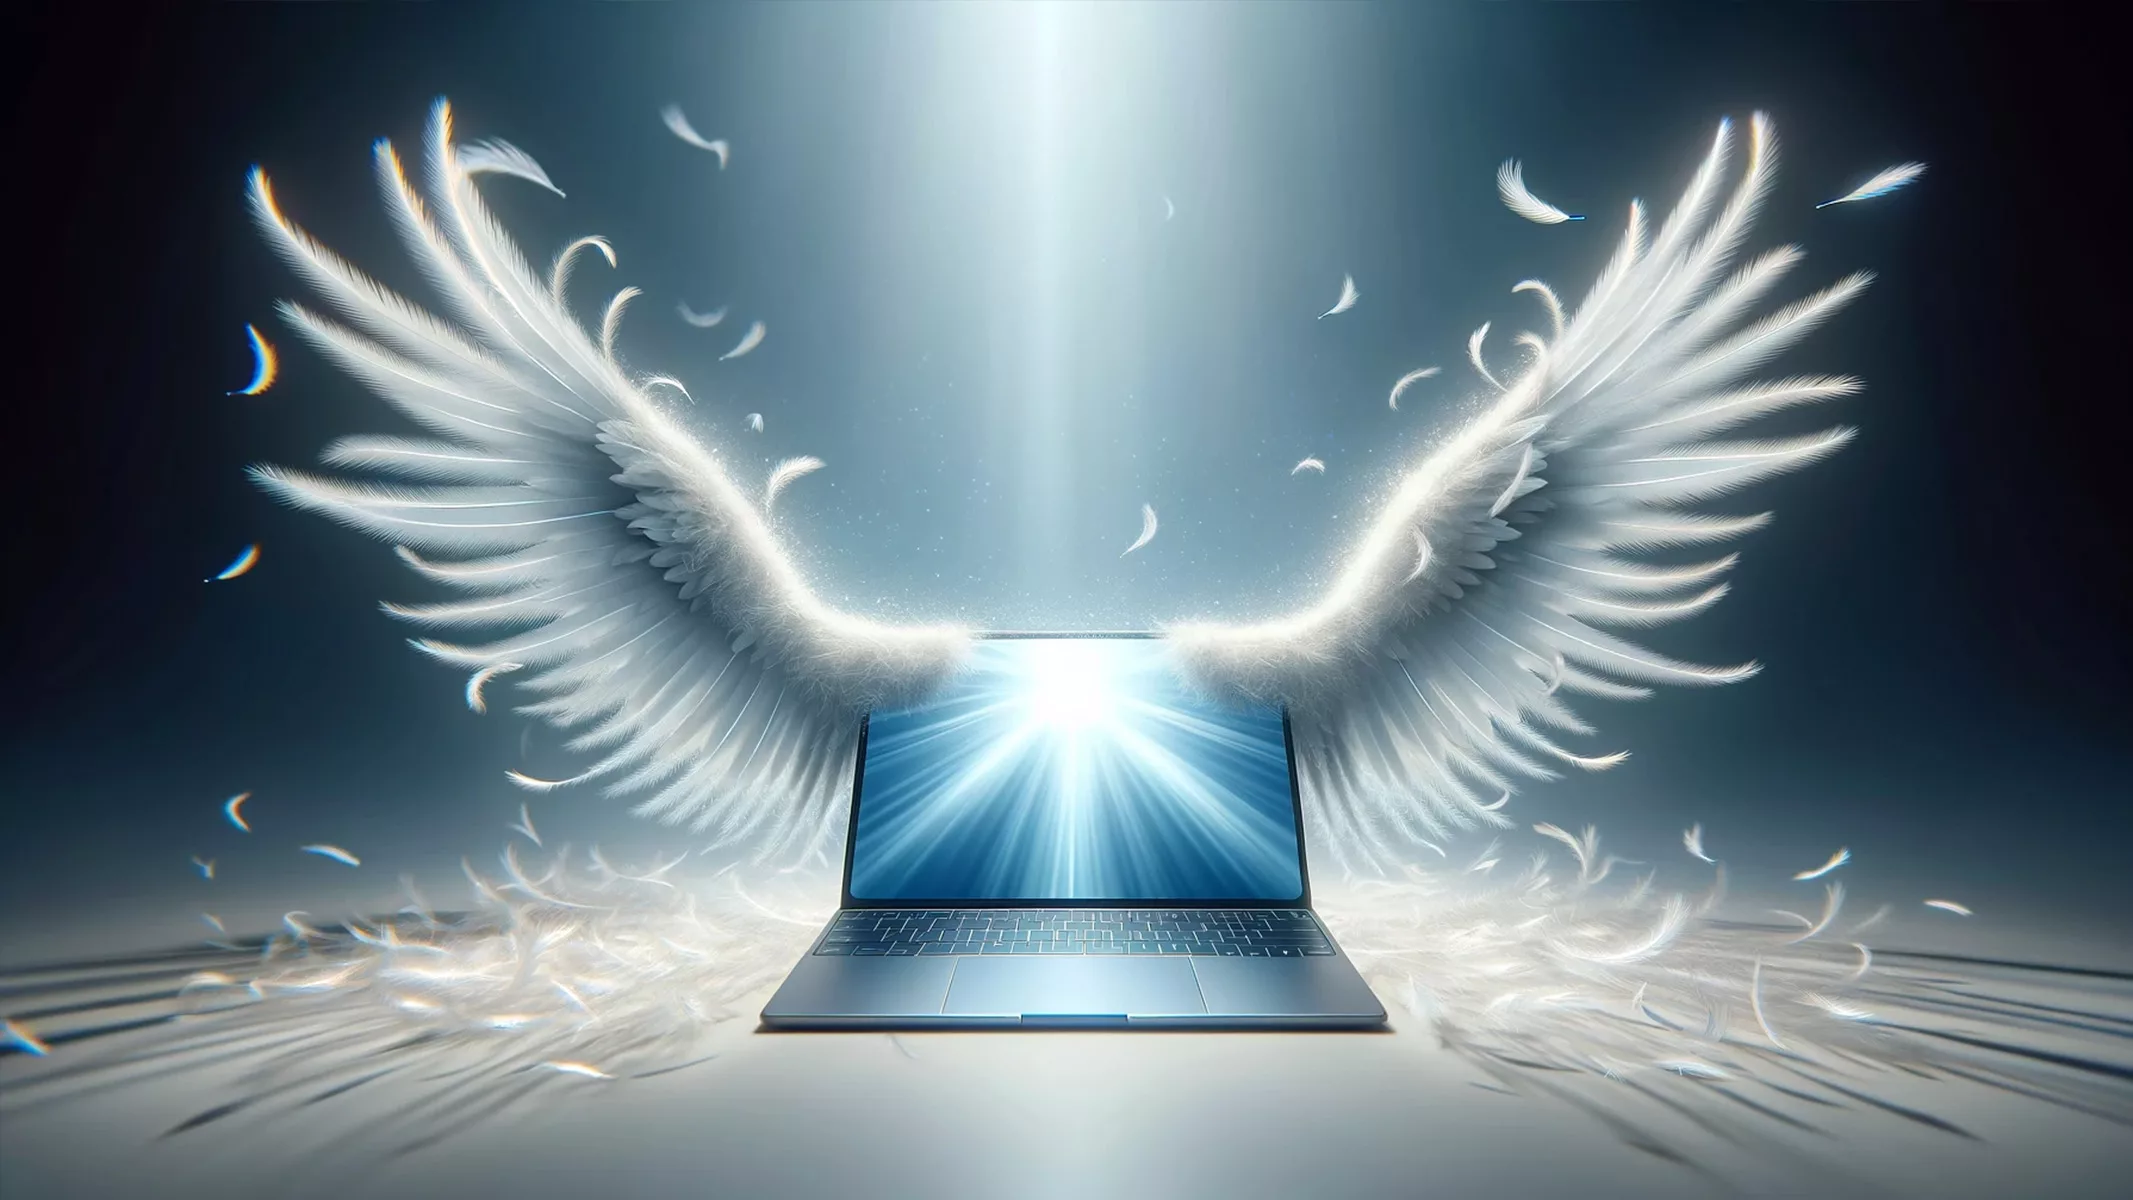 A super-light laptop with delicate, feathery wings extended from its sides, creating an impression of flight